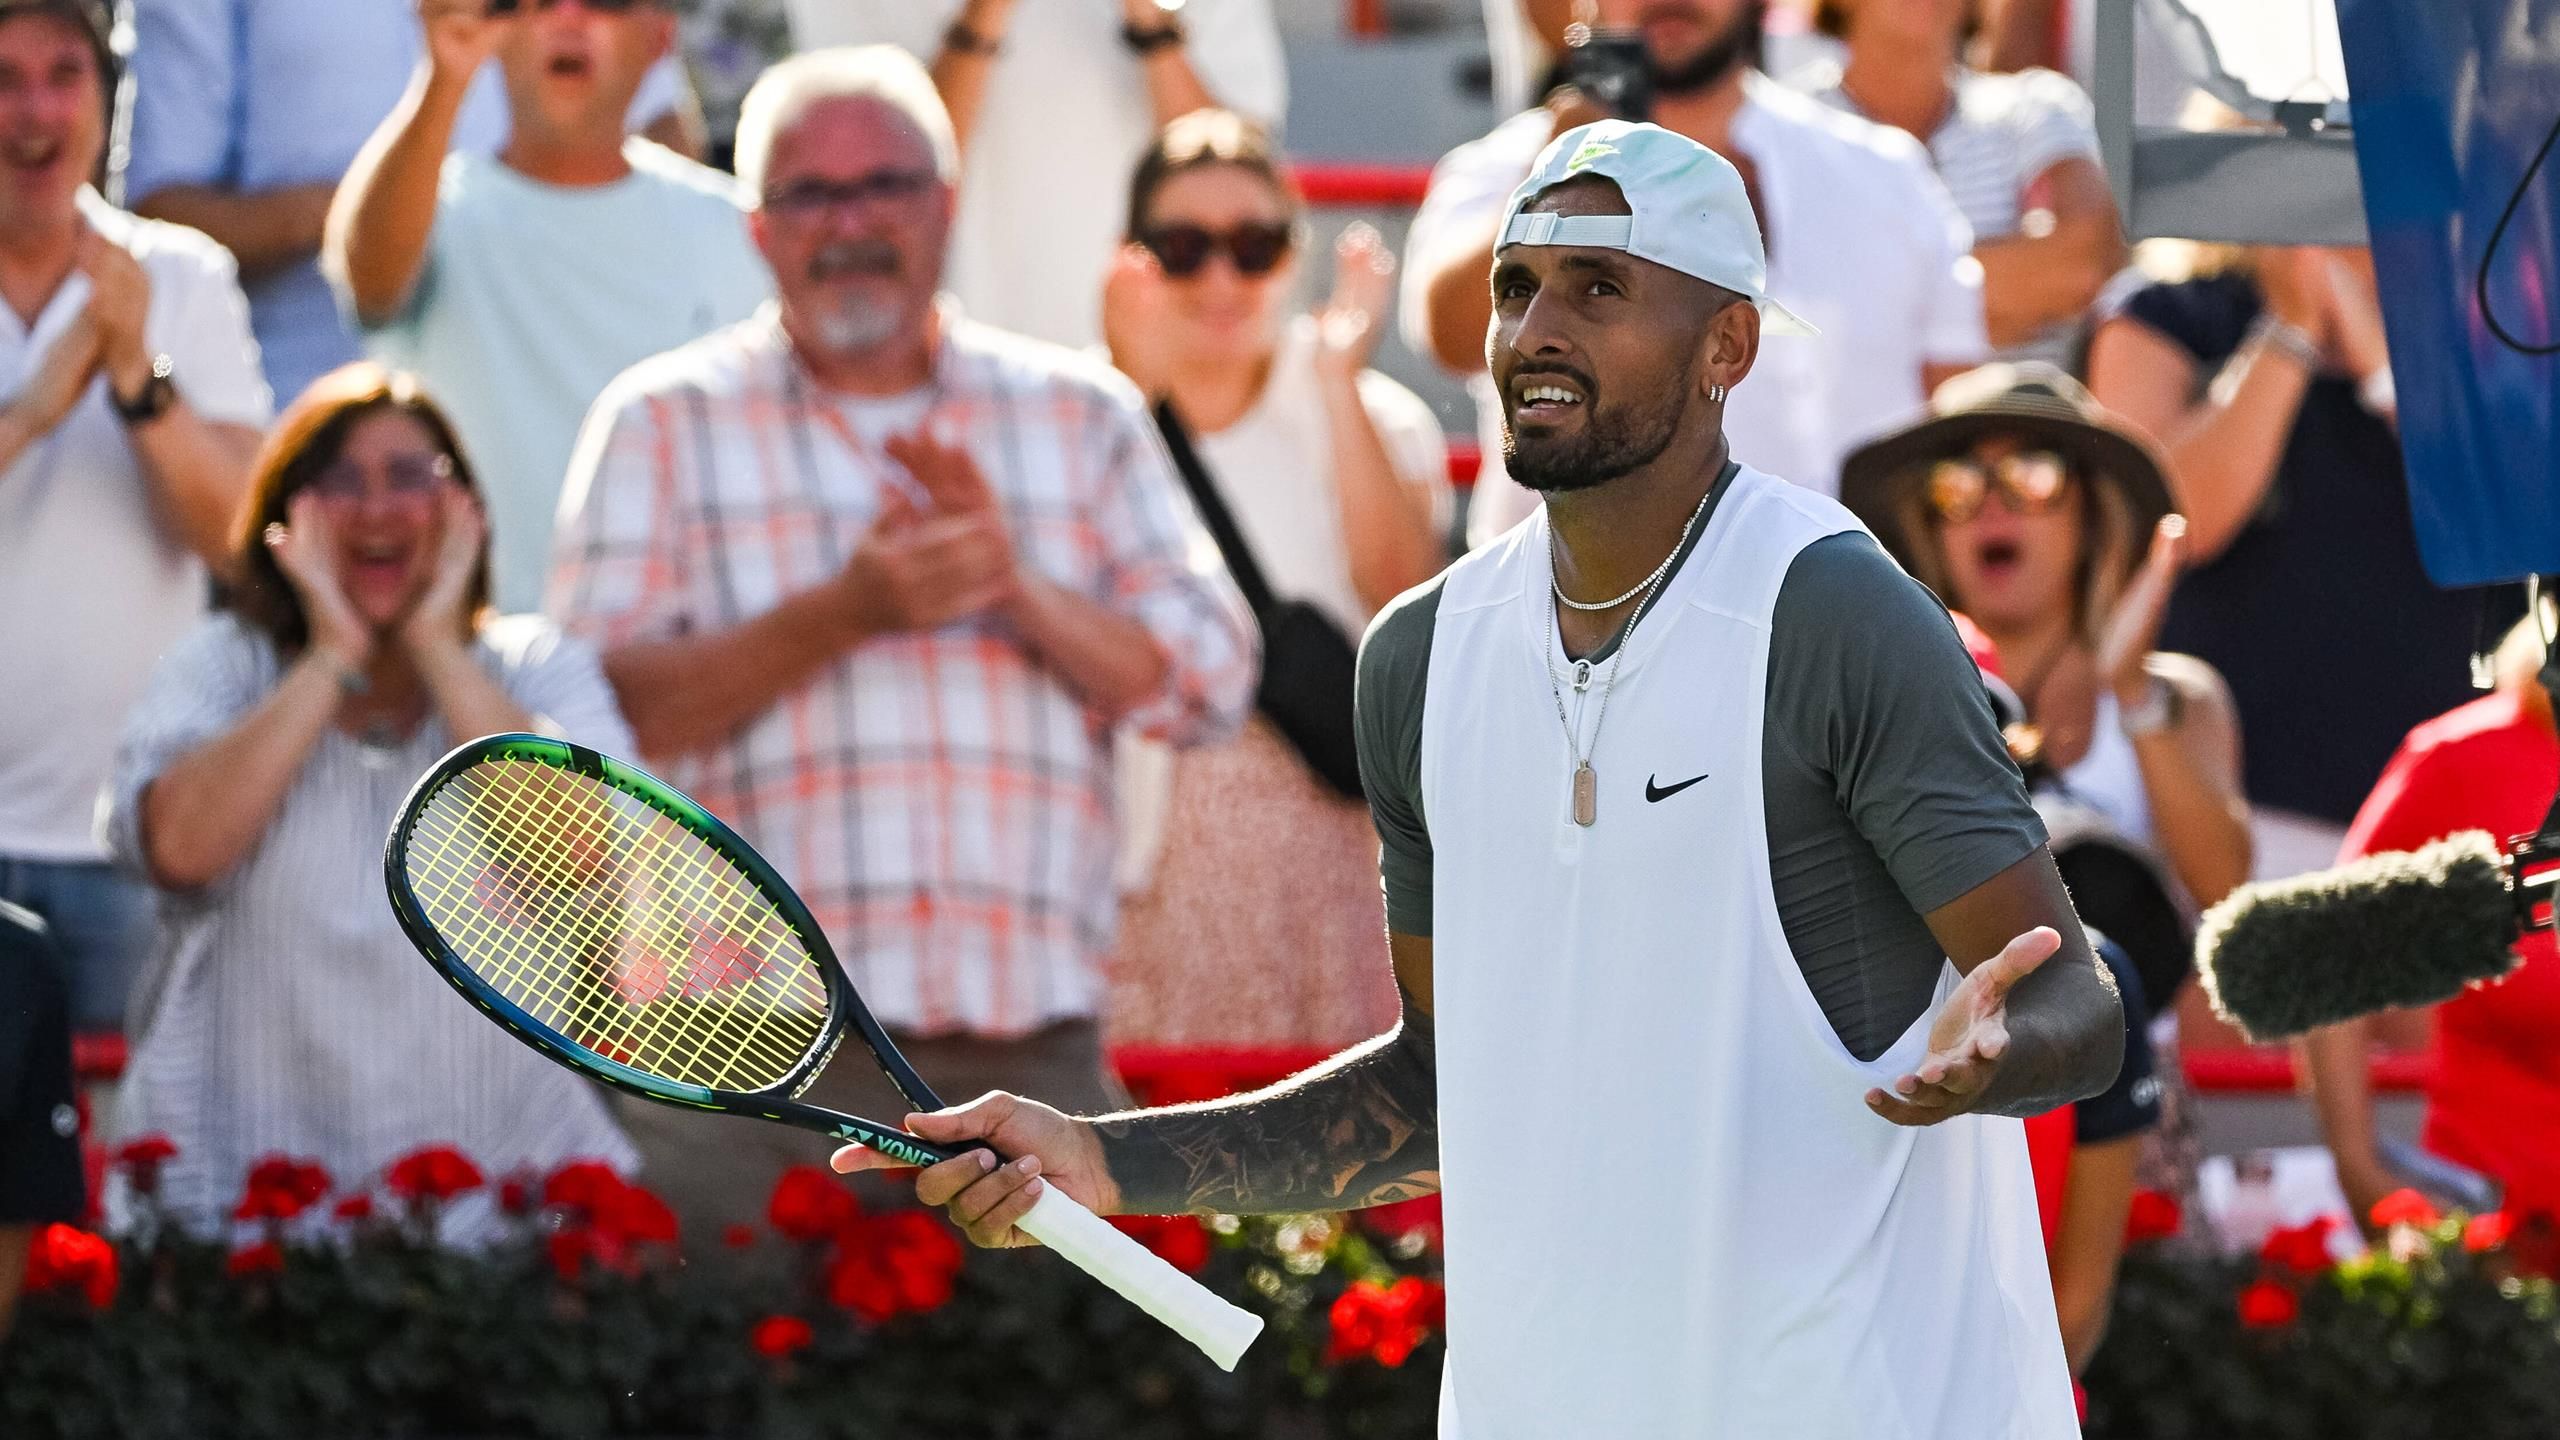 Nick Kyrgios upsets Polands Hubert Hurkacz by racing through service games in Montreal Open defeat